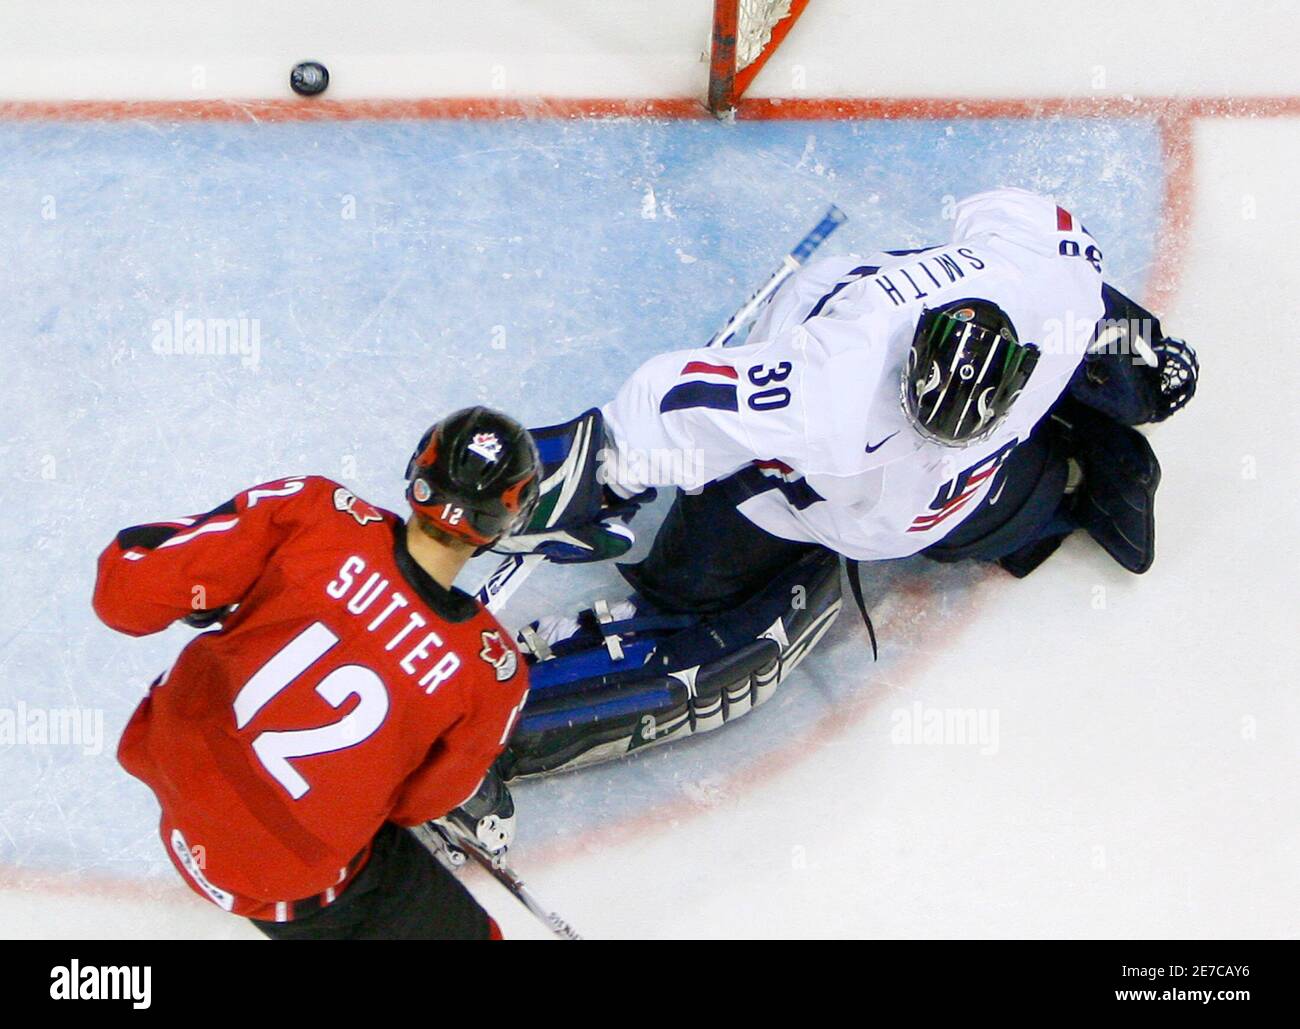 canadas-brandon-sutter-l-watches-a-goal-get-past-team-usa-goalie-jeremy-smith-during-the-third-period-of-their-semi-final-game-at-the-2008-iihf-u20-world-junior-hockey-championships-in-pardubice-january-4-2008-reutersshaun-best-czech-republic-2E7CAY6.jpg